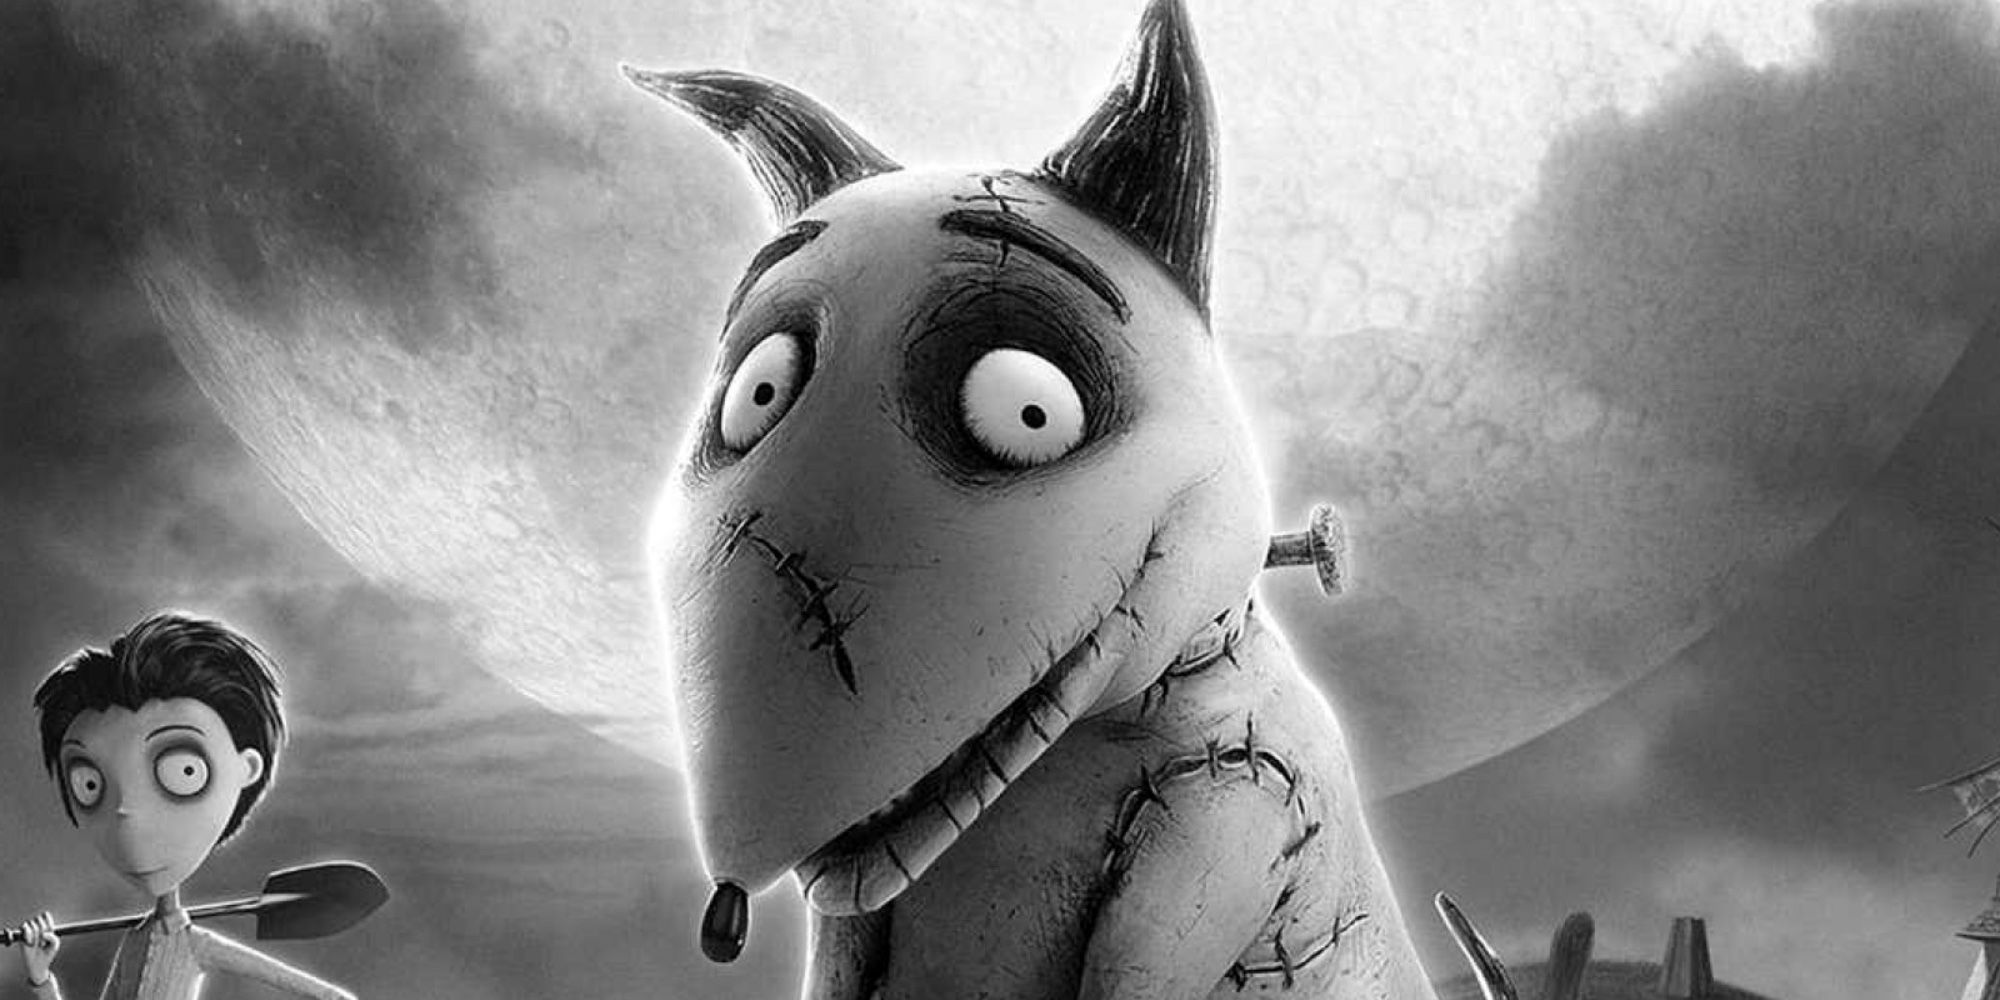 Sparky smiling, with Victor in the back with a shovel in the movie poster for Frankenweenie.